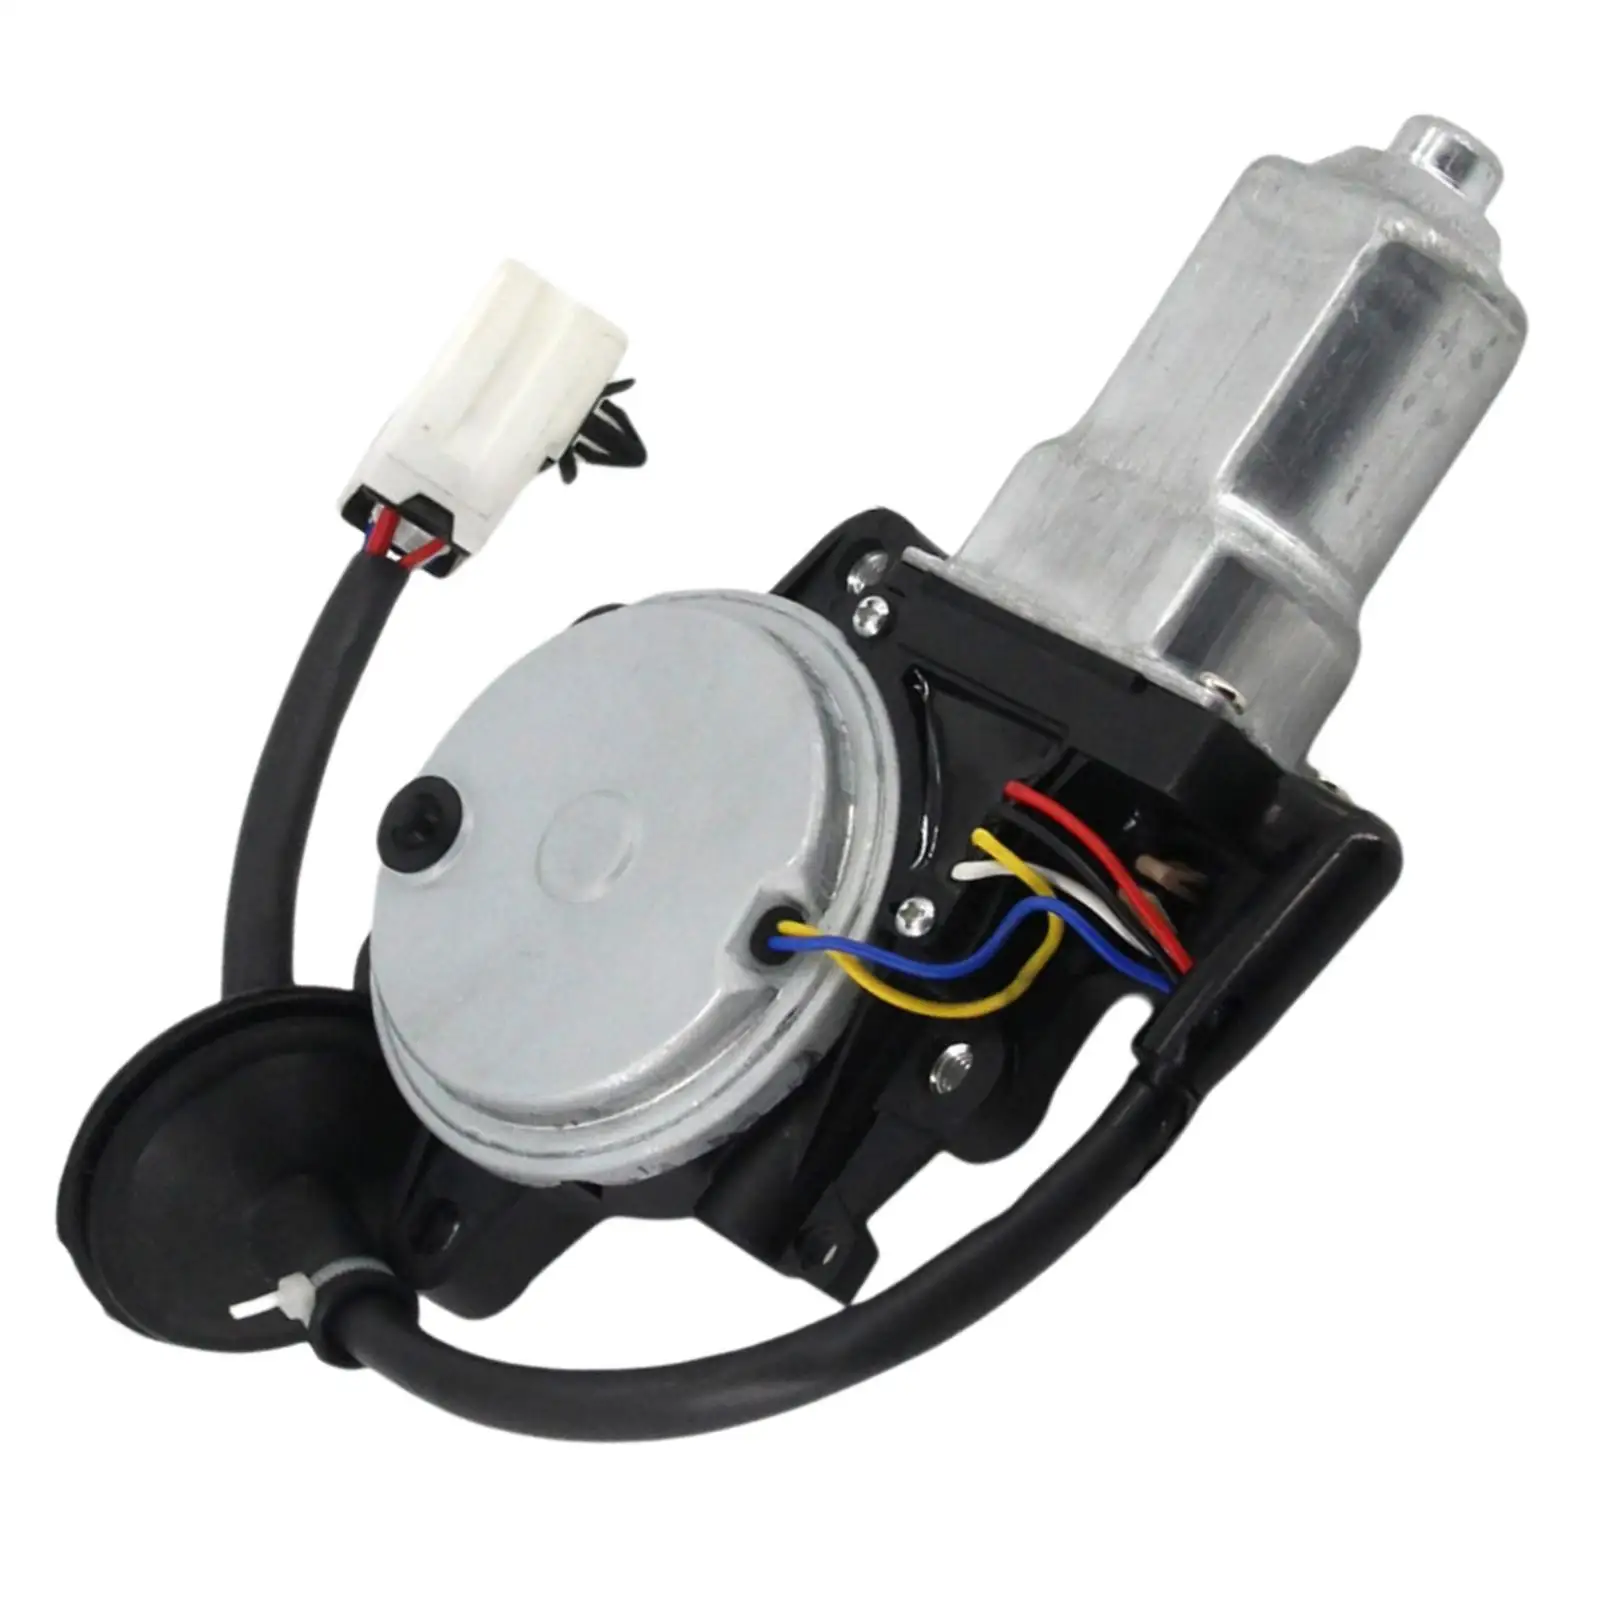 Engine Power Window Lift Motor 617-51250R Front Right Hand Window Motor Fit for Nissan 350Z G35 2003-09 80730CD00 80730-Cd00A